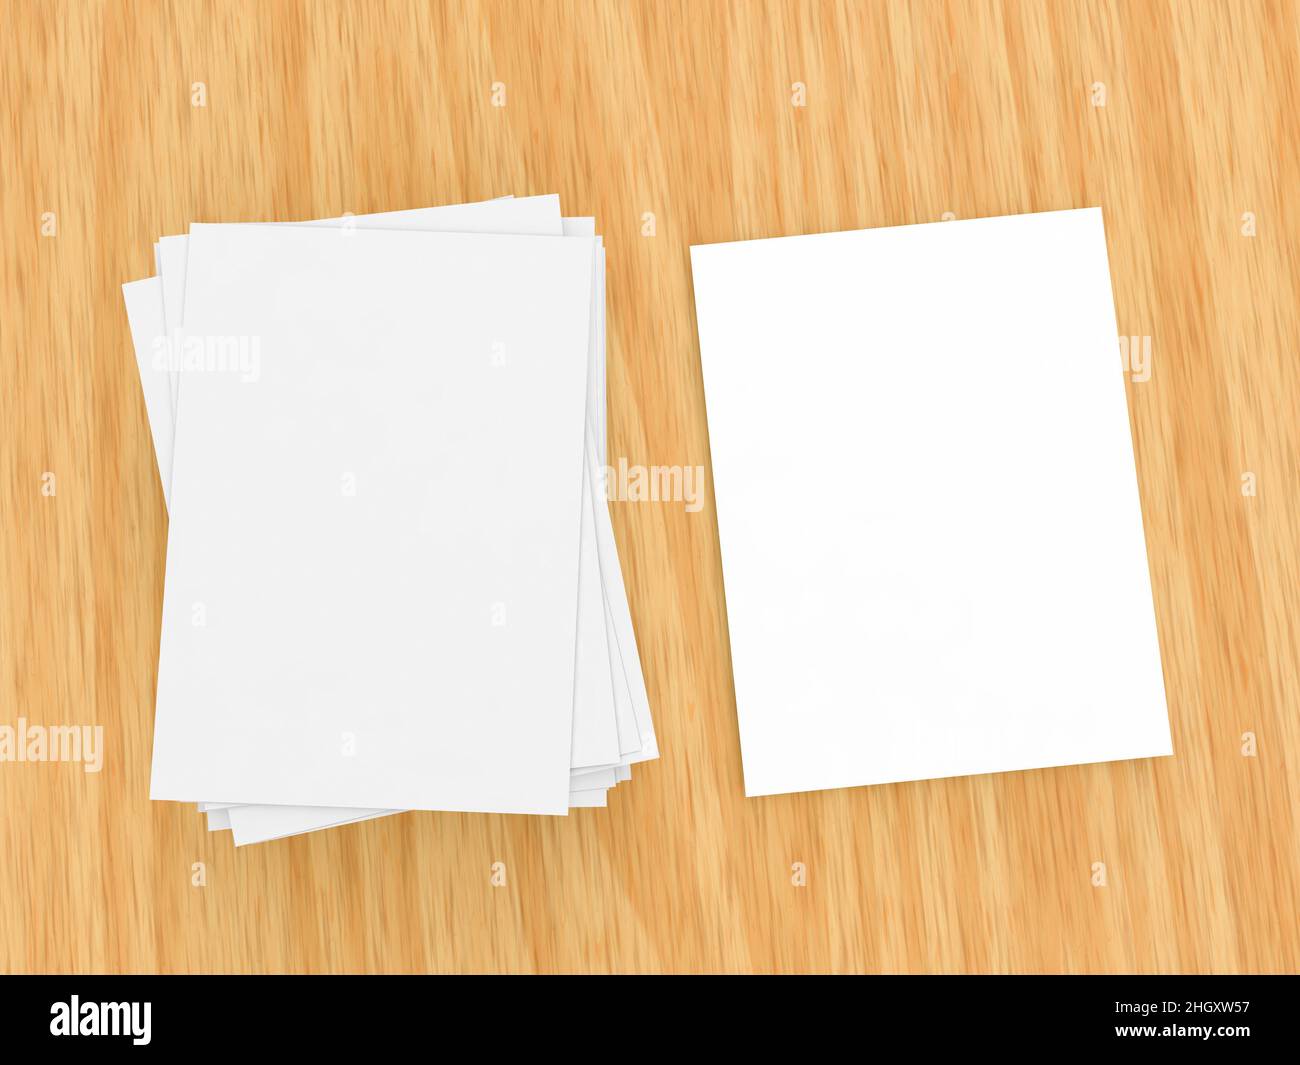 A stack of A4 paper on a wooden table. 3d render illustration. Stock Photo